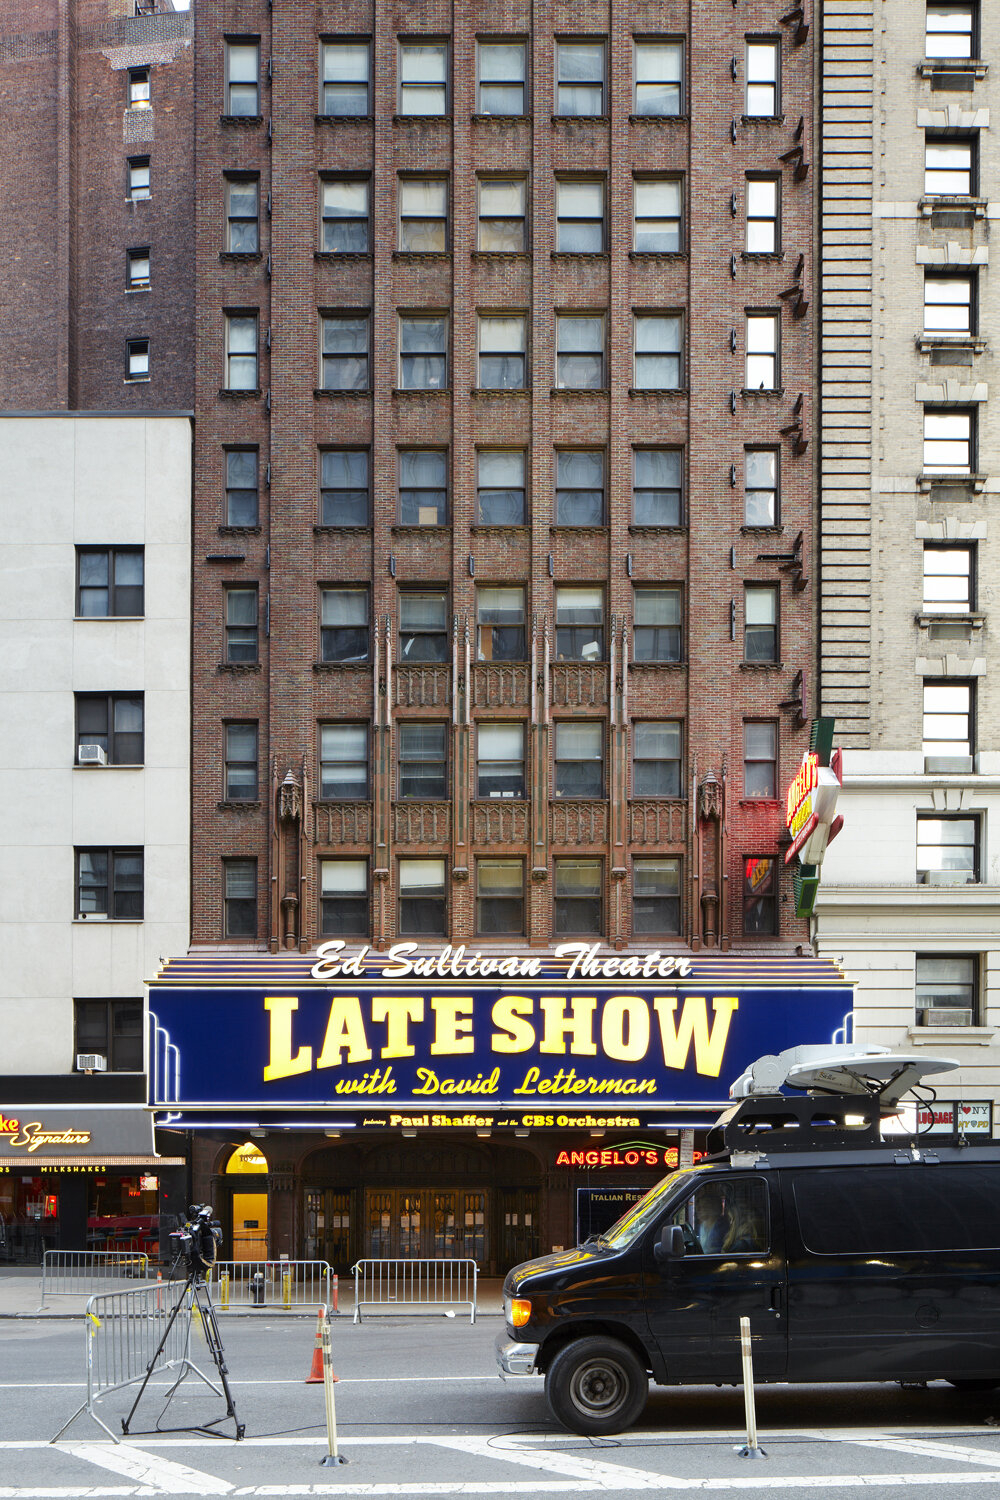  Ed Sullivan Theater on the morning of May 20, 2015. The last day of David Letterman hosting the Late Show.  New York, New York 